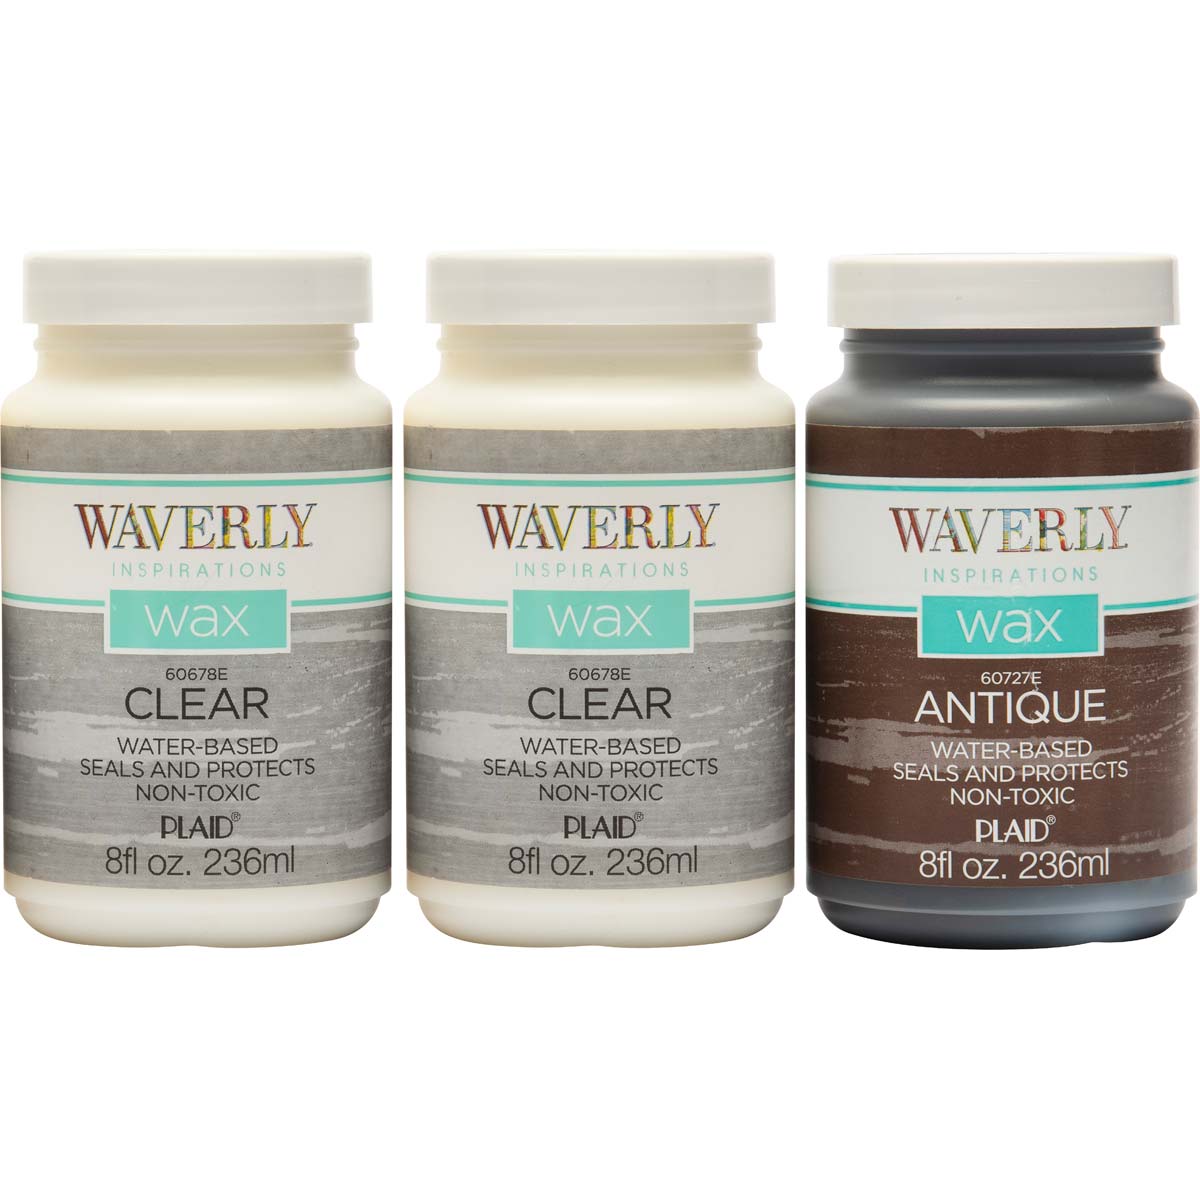 Shop Plaid Waverly ® Inspirations Wax Set - Clear and Antique, 3